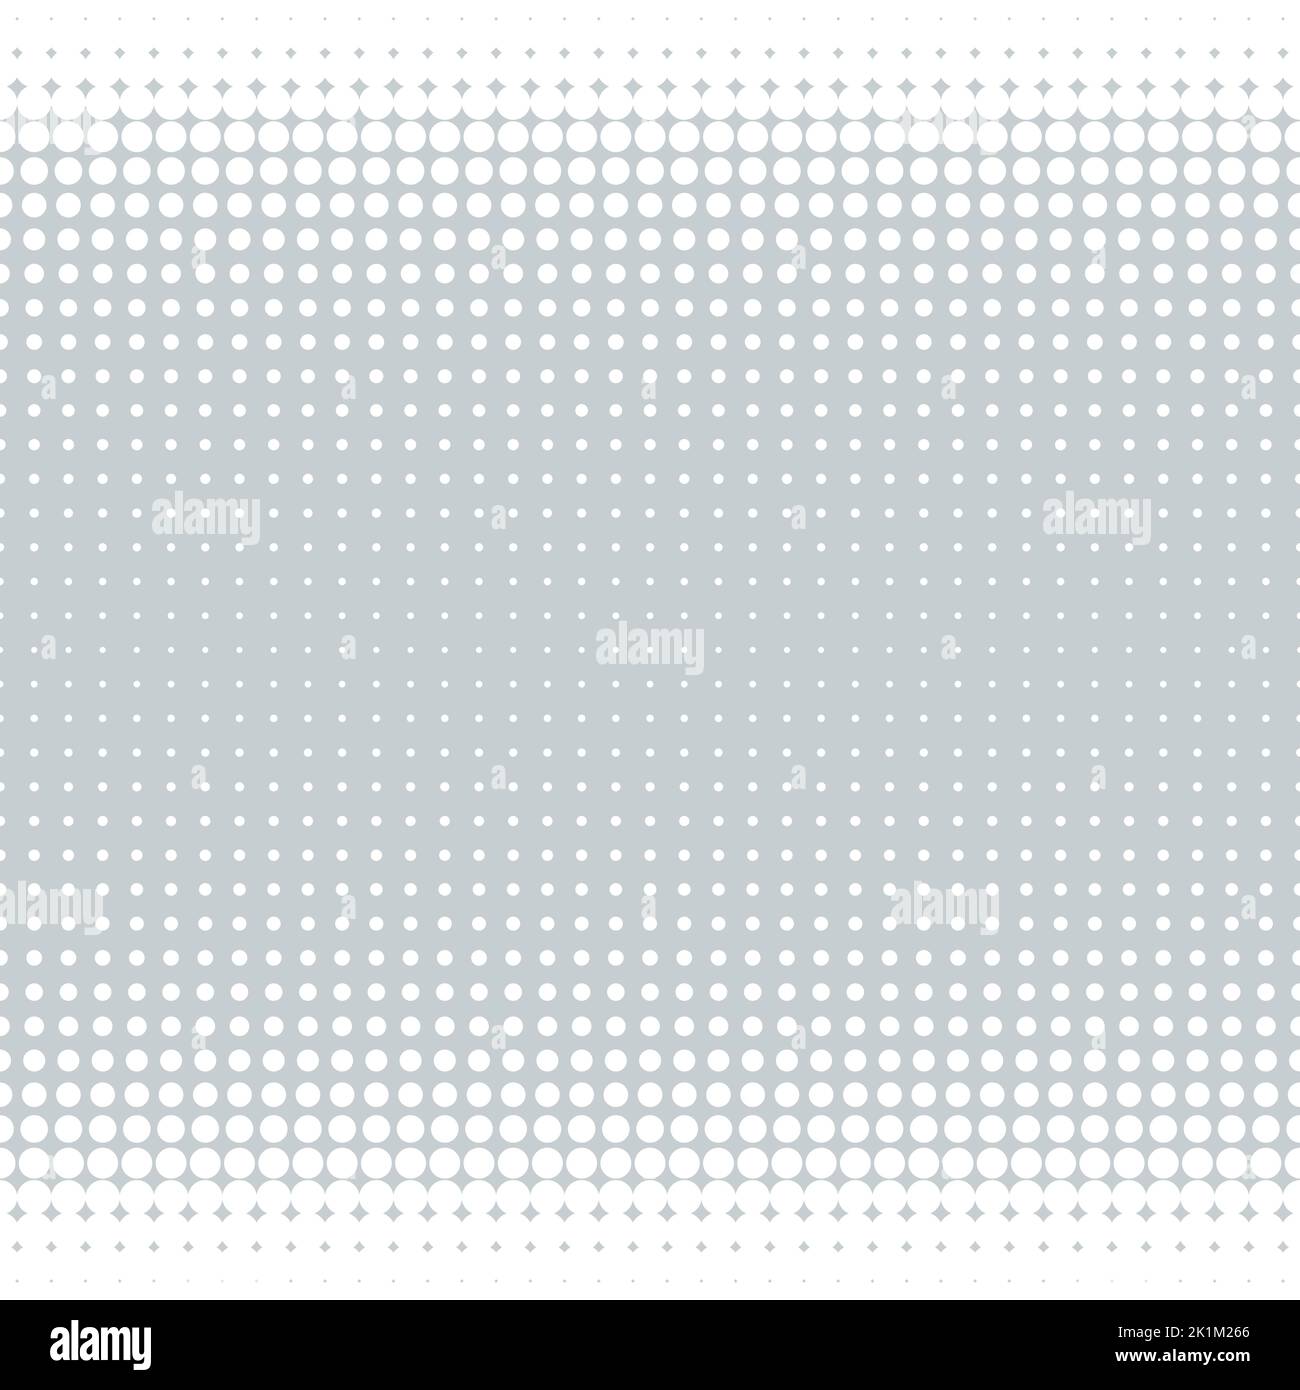 Abstract halftone dotted pattern. Dotted gradient halftone vector illustration. White on grey pastel half tone seamless texture. Stock Vector